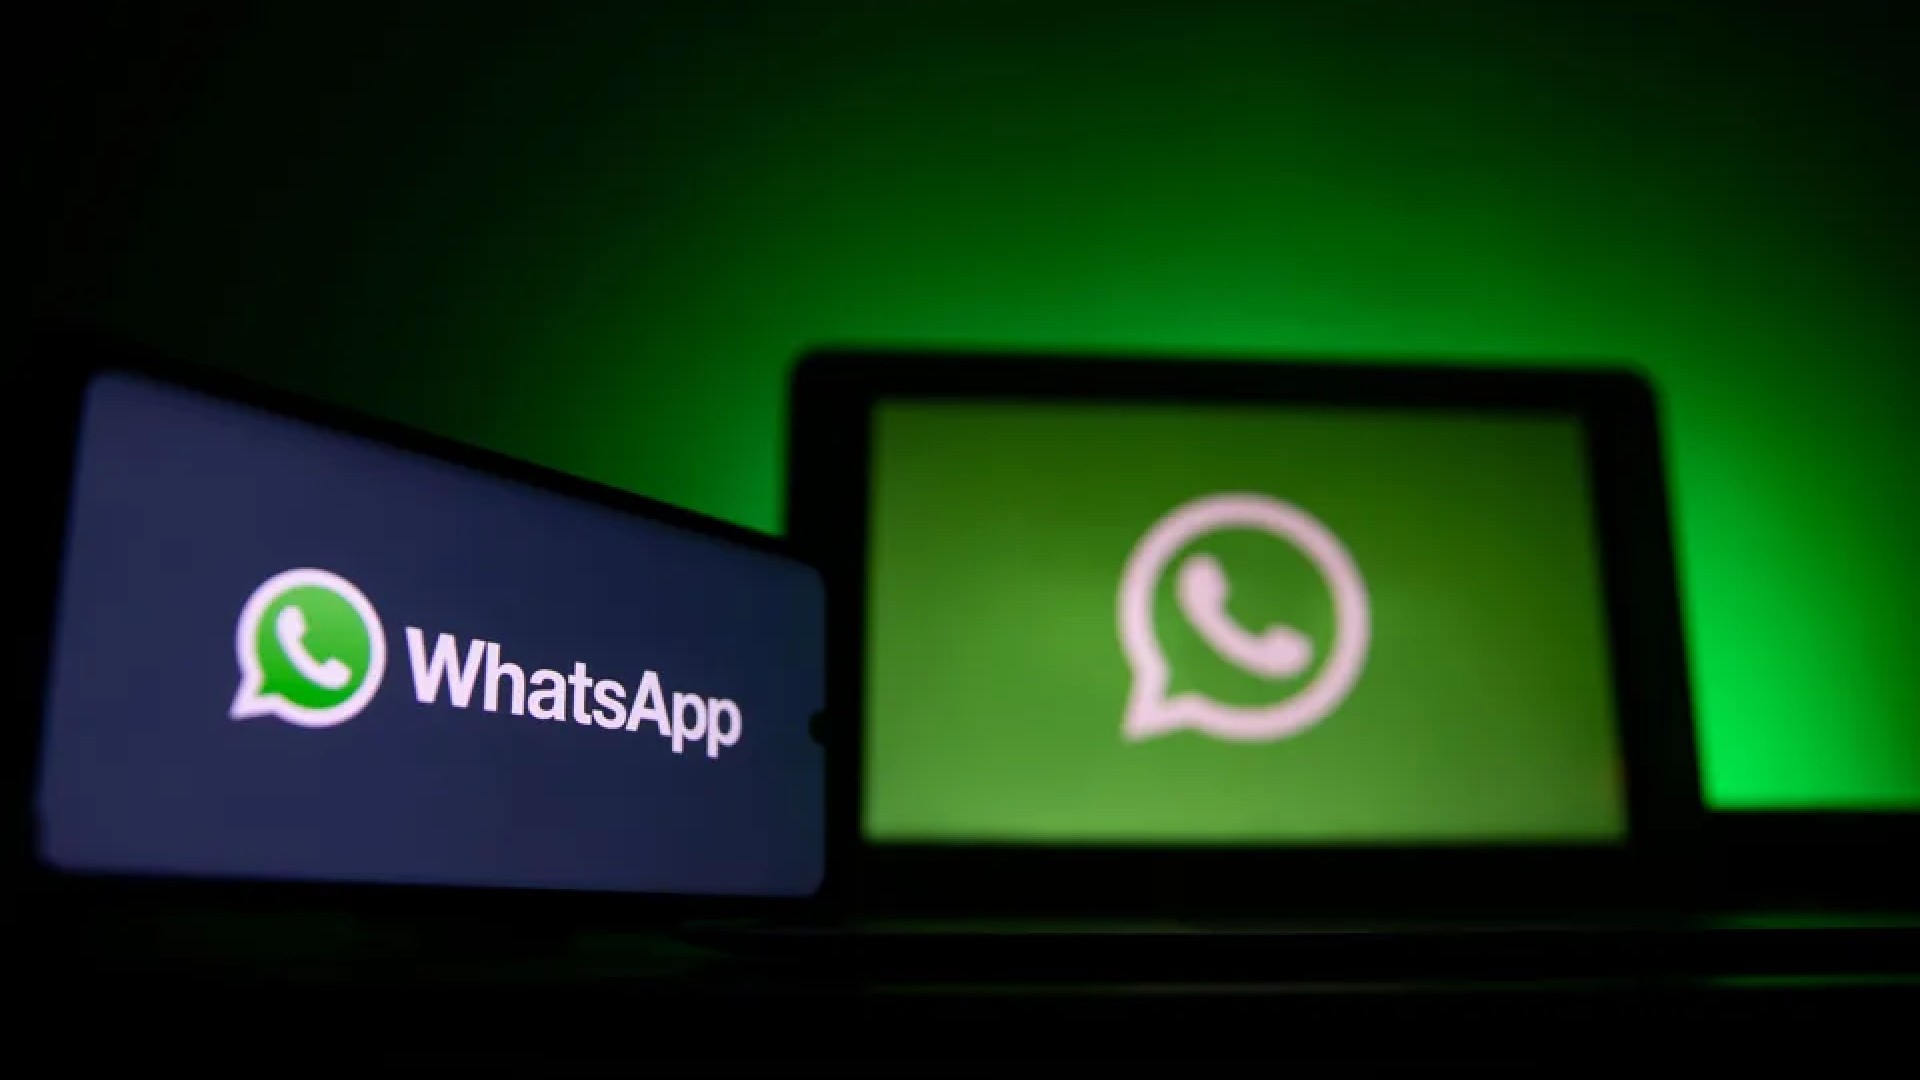 WhatsApp New Feature ‘View Once’ That Allows Users To Send Disappearing Photos, Videos